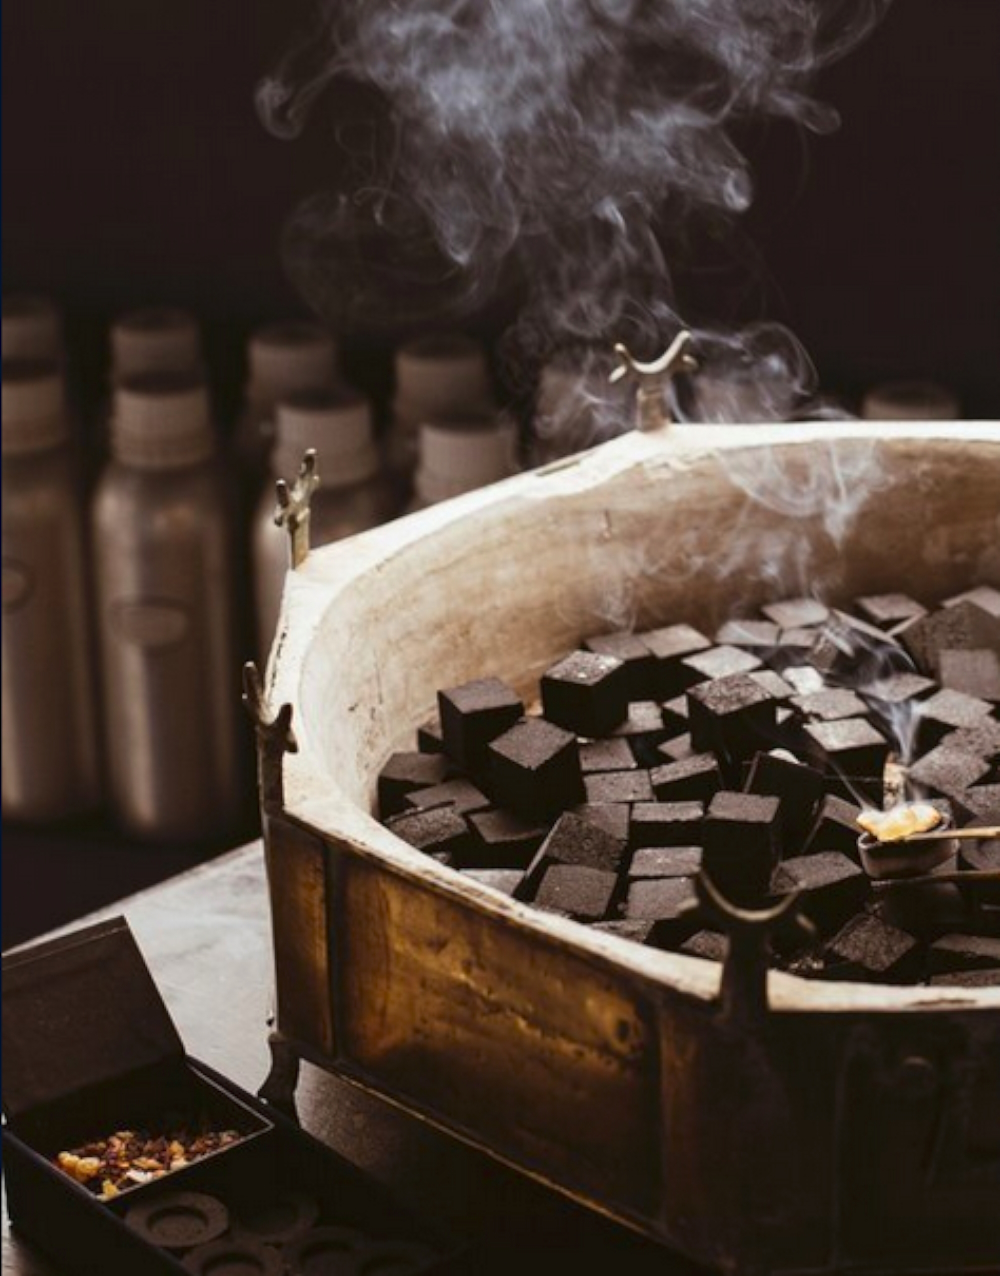 Hot incense and charcoals: 